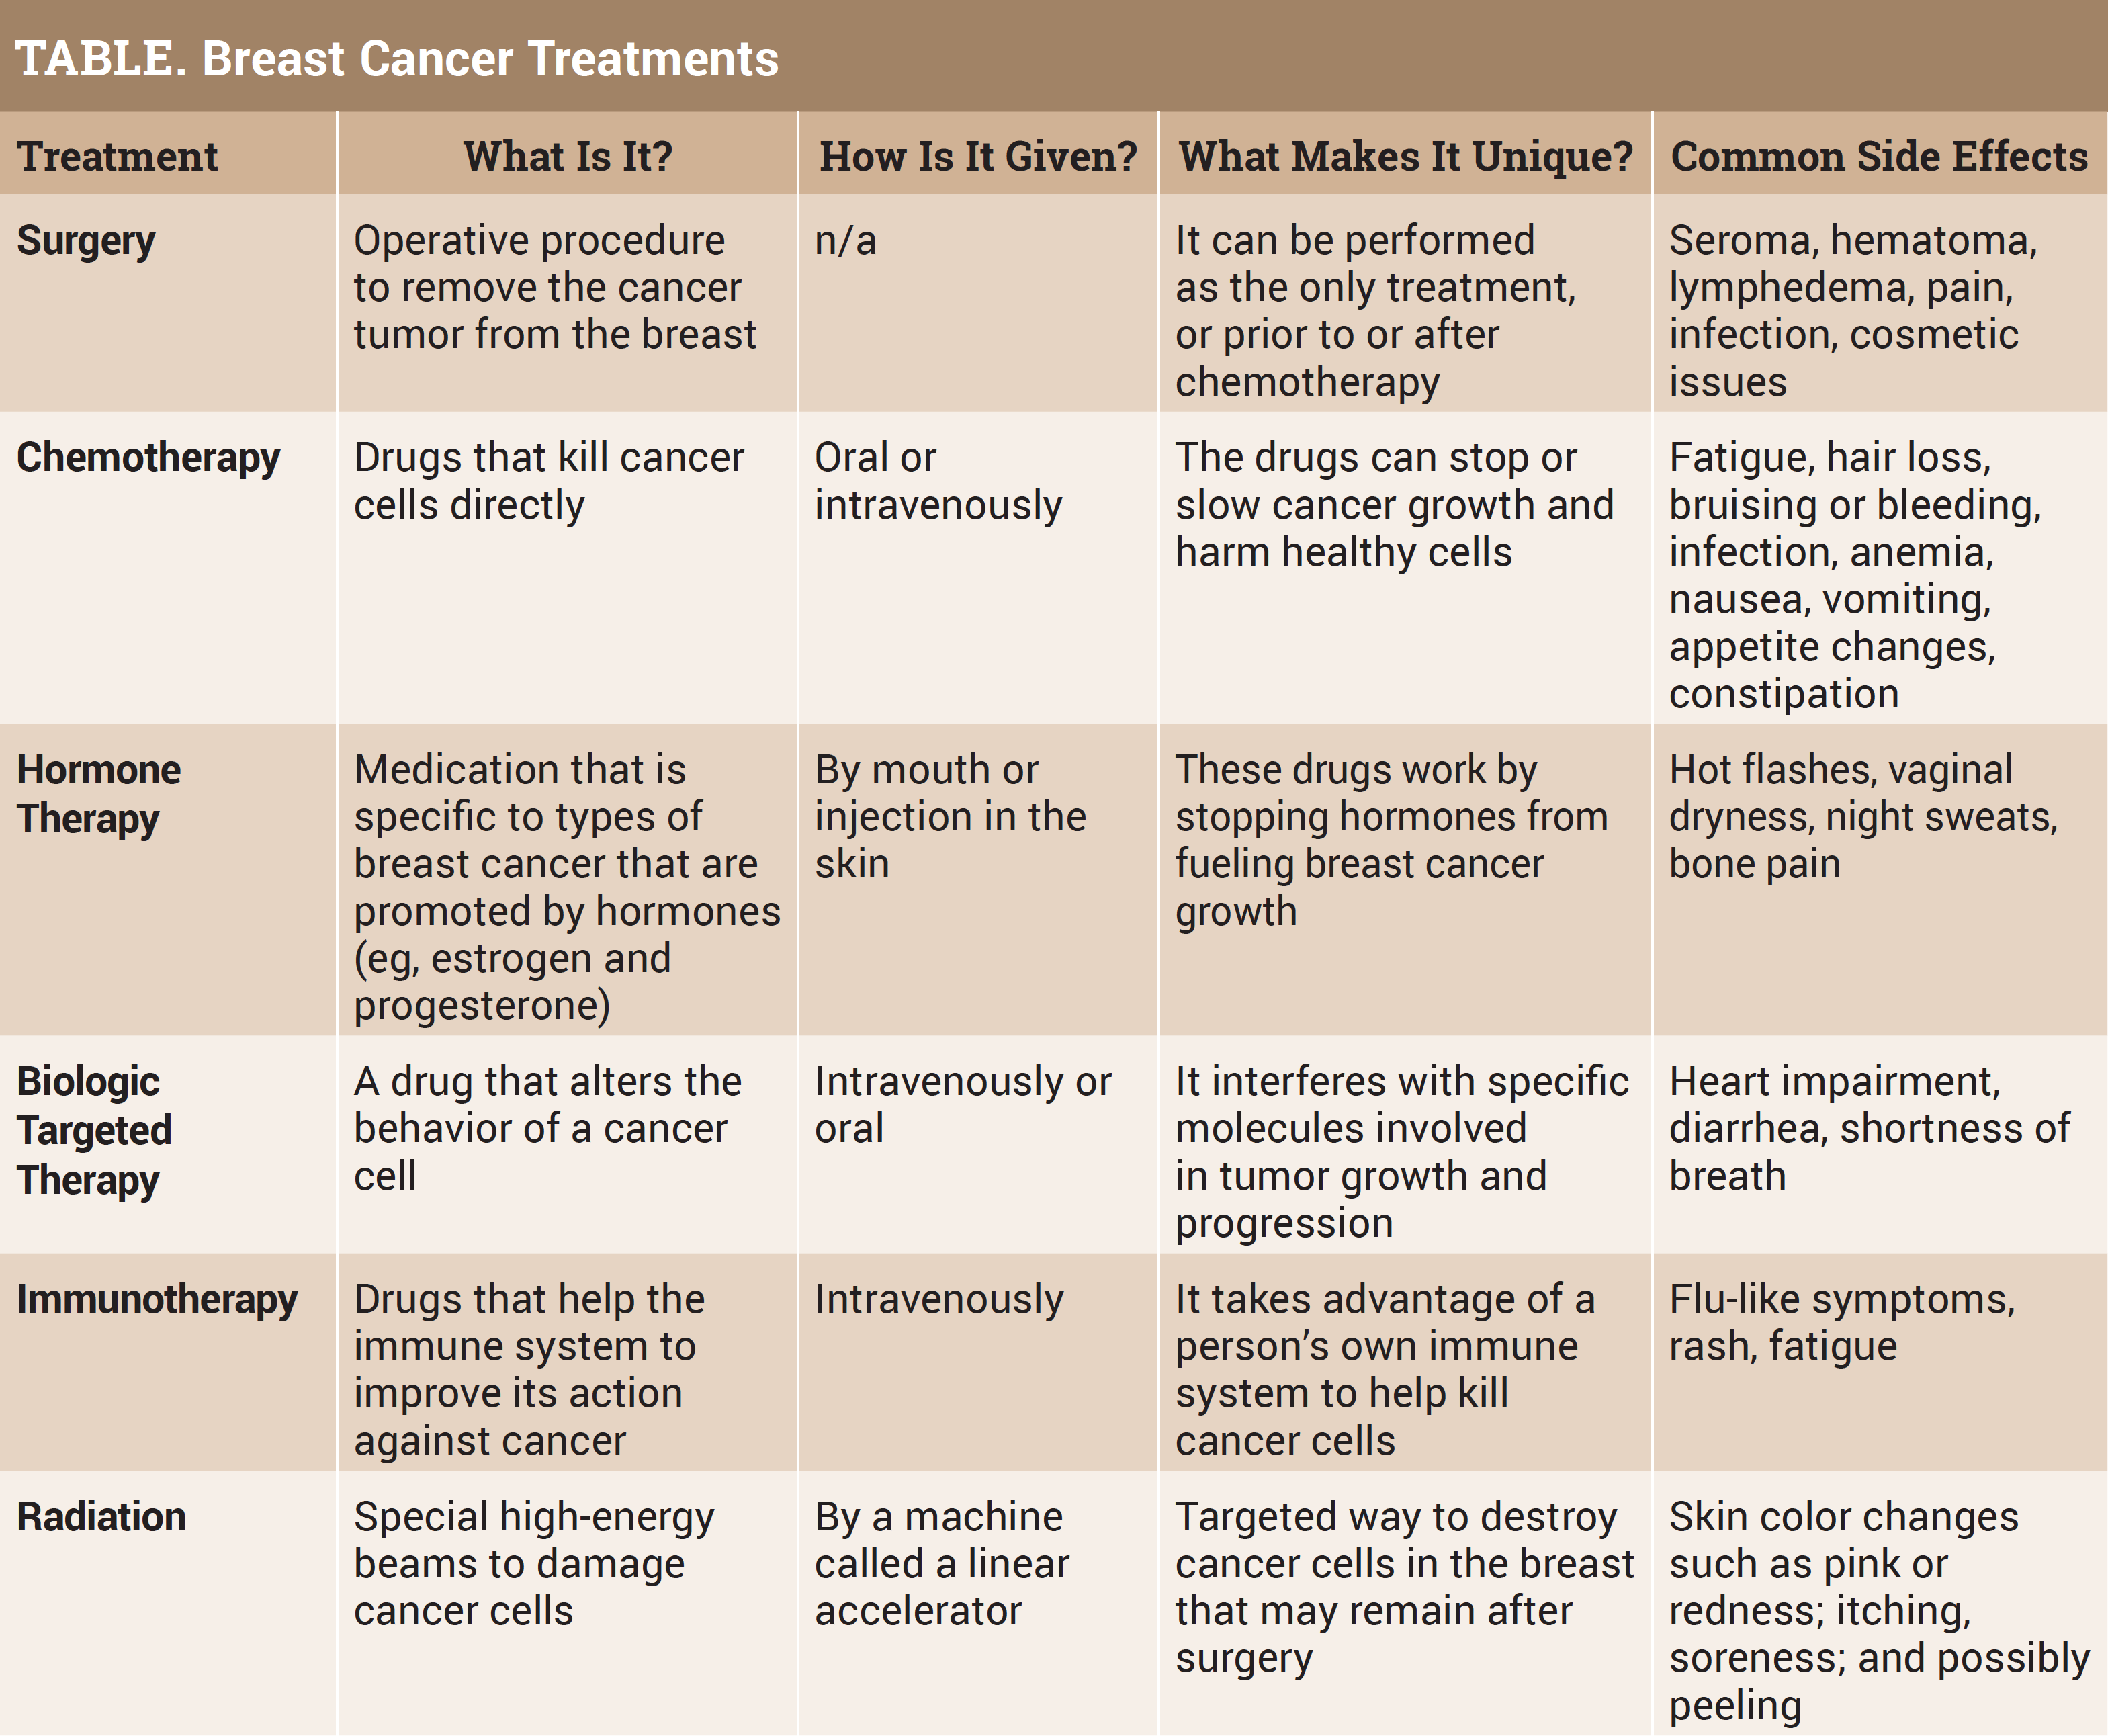 Radiation Therapy for Breast Cancer: Types & Side Effects